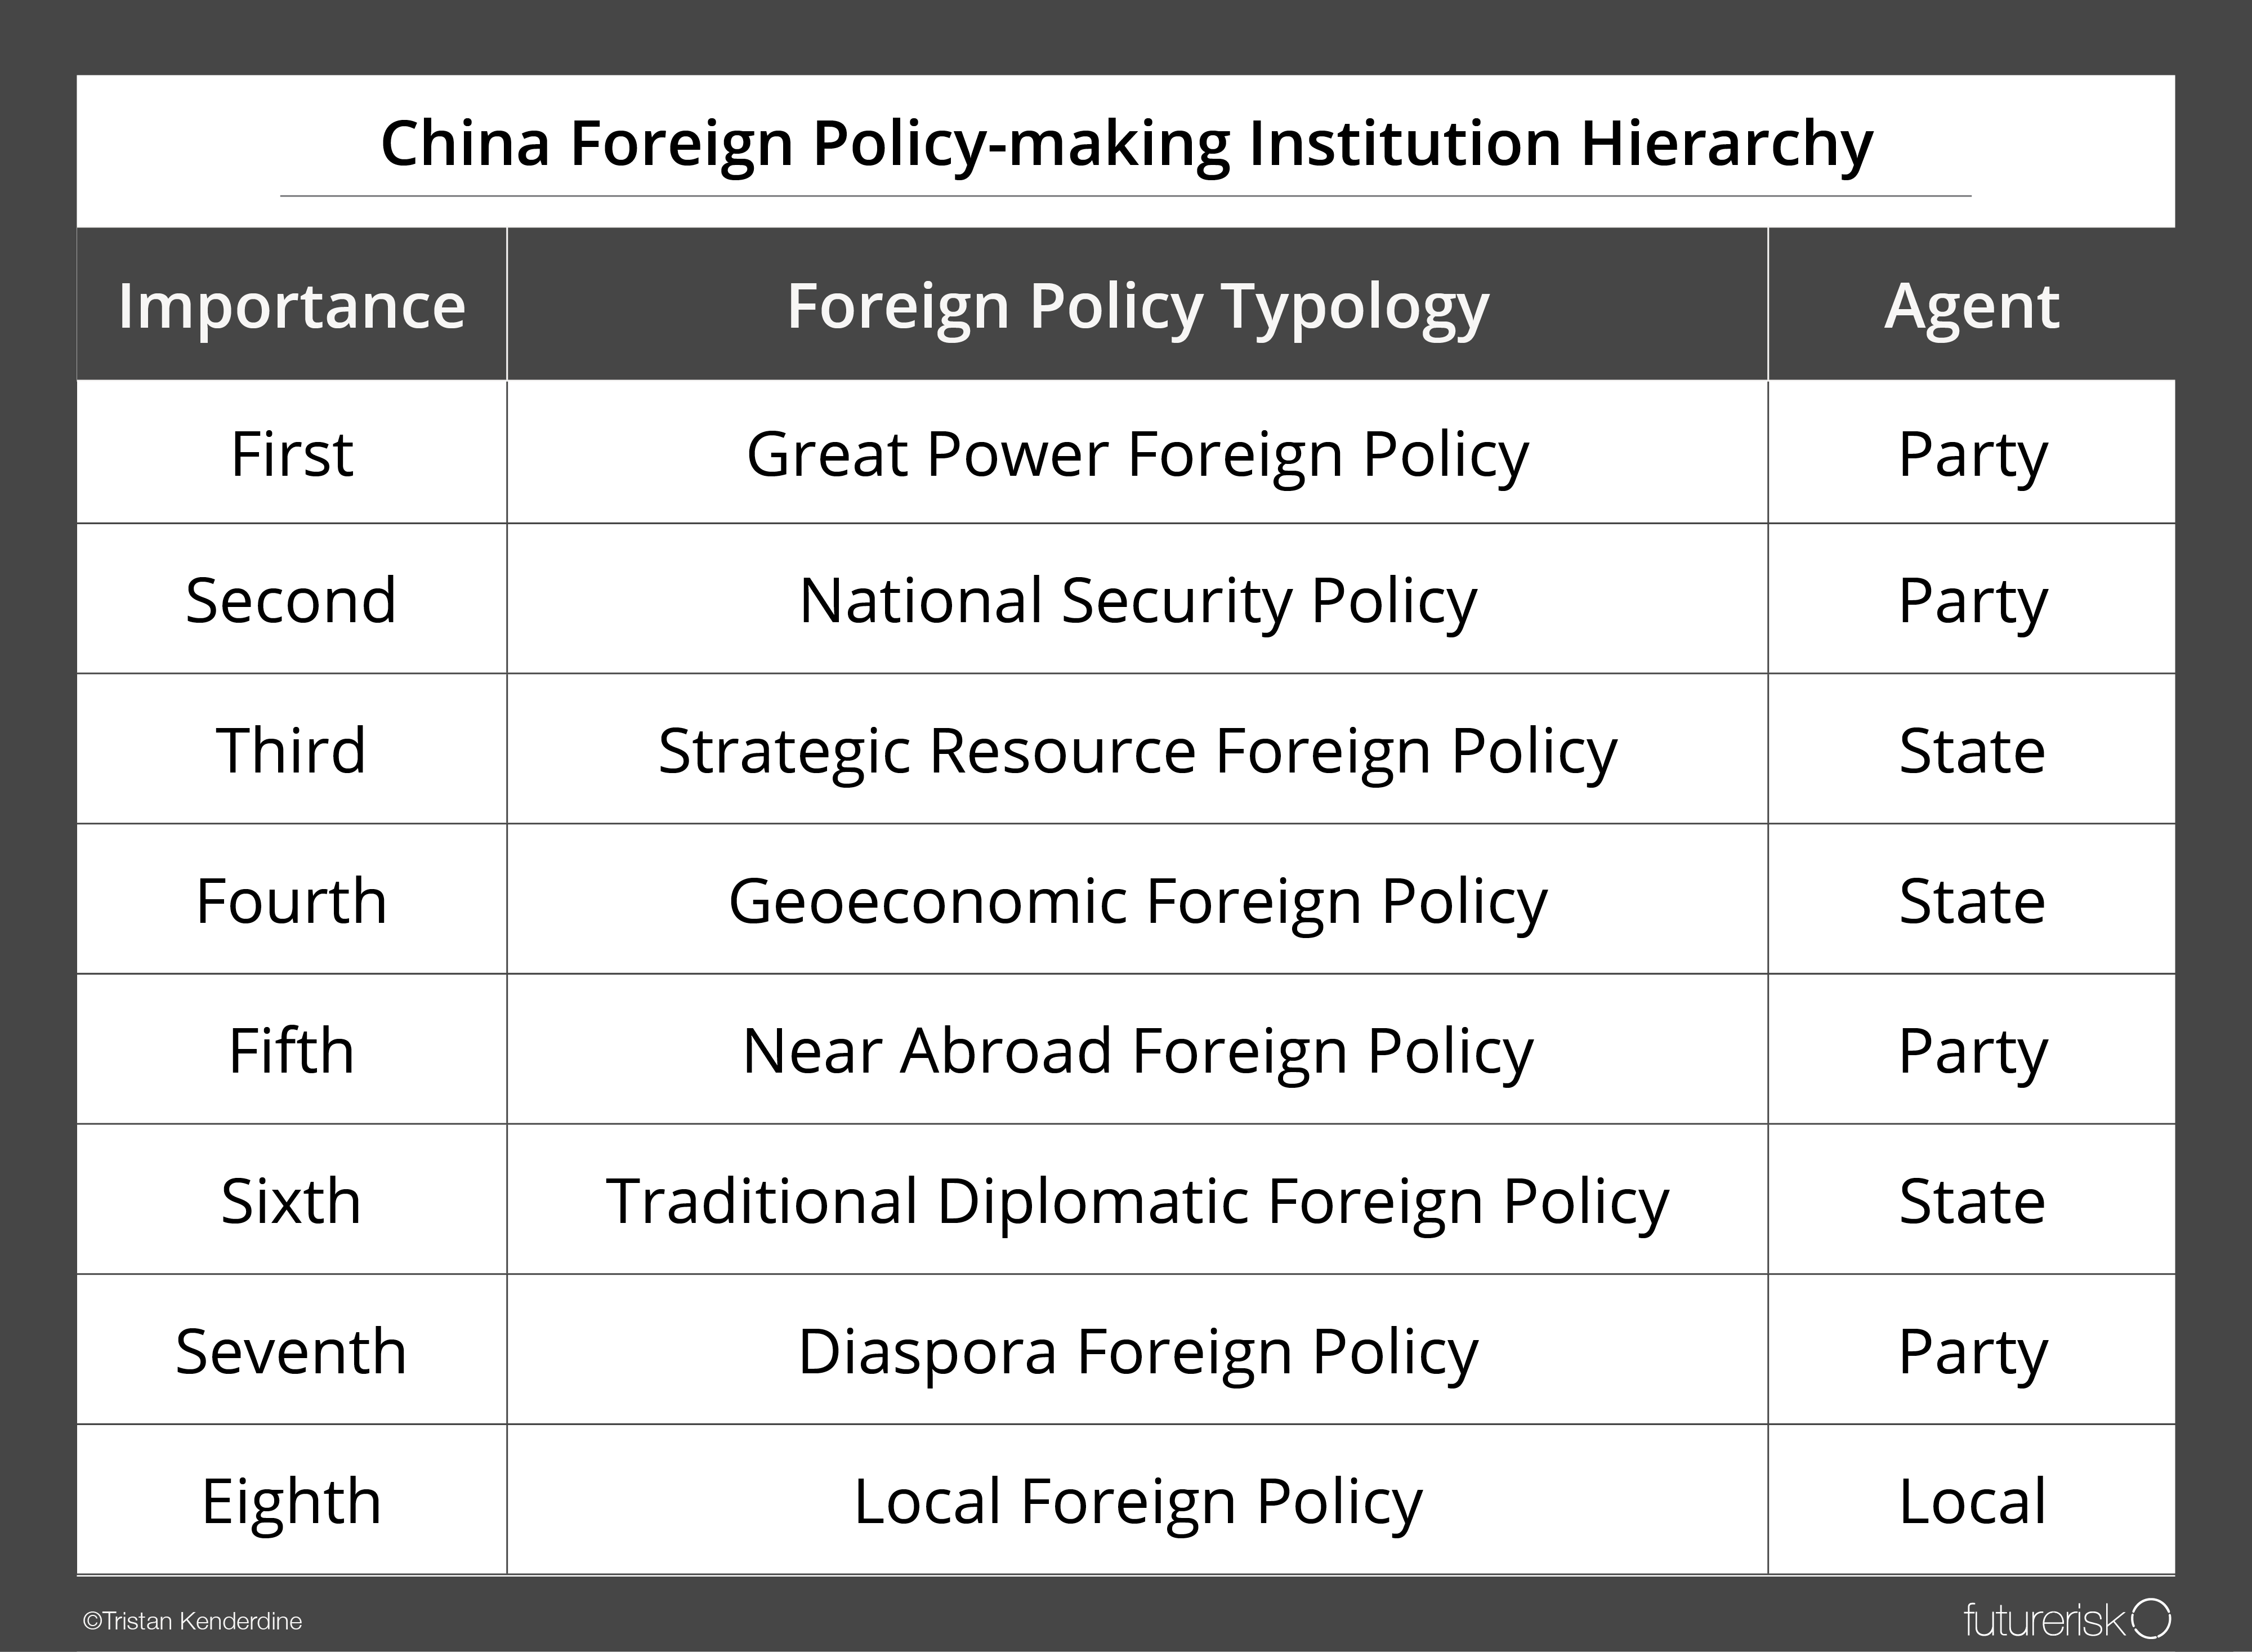 Who Makes Foreign Policy in China? The Diplomat